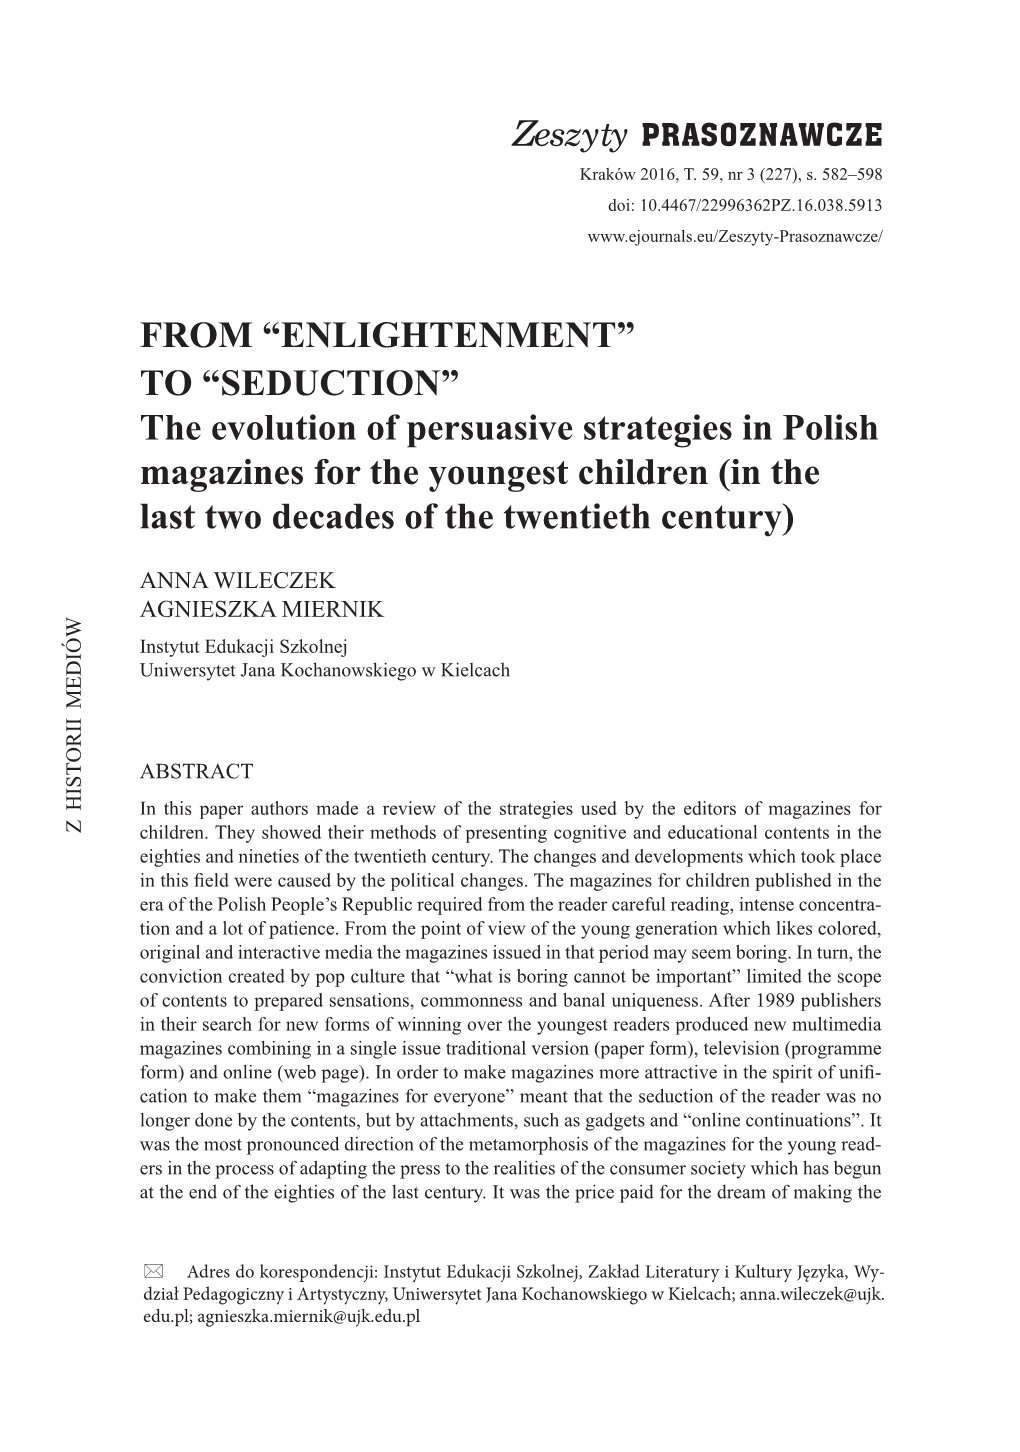 The Evolution of Persuasive Strategies in Polish Magazines for The